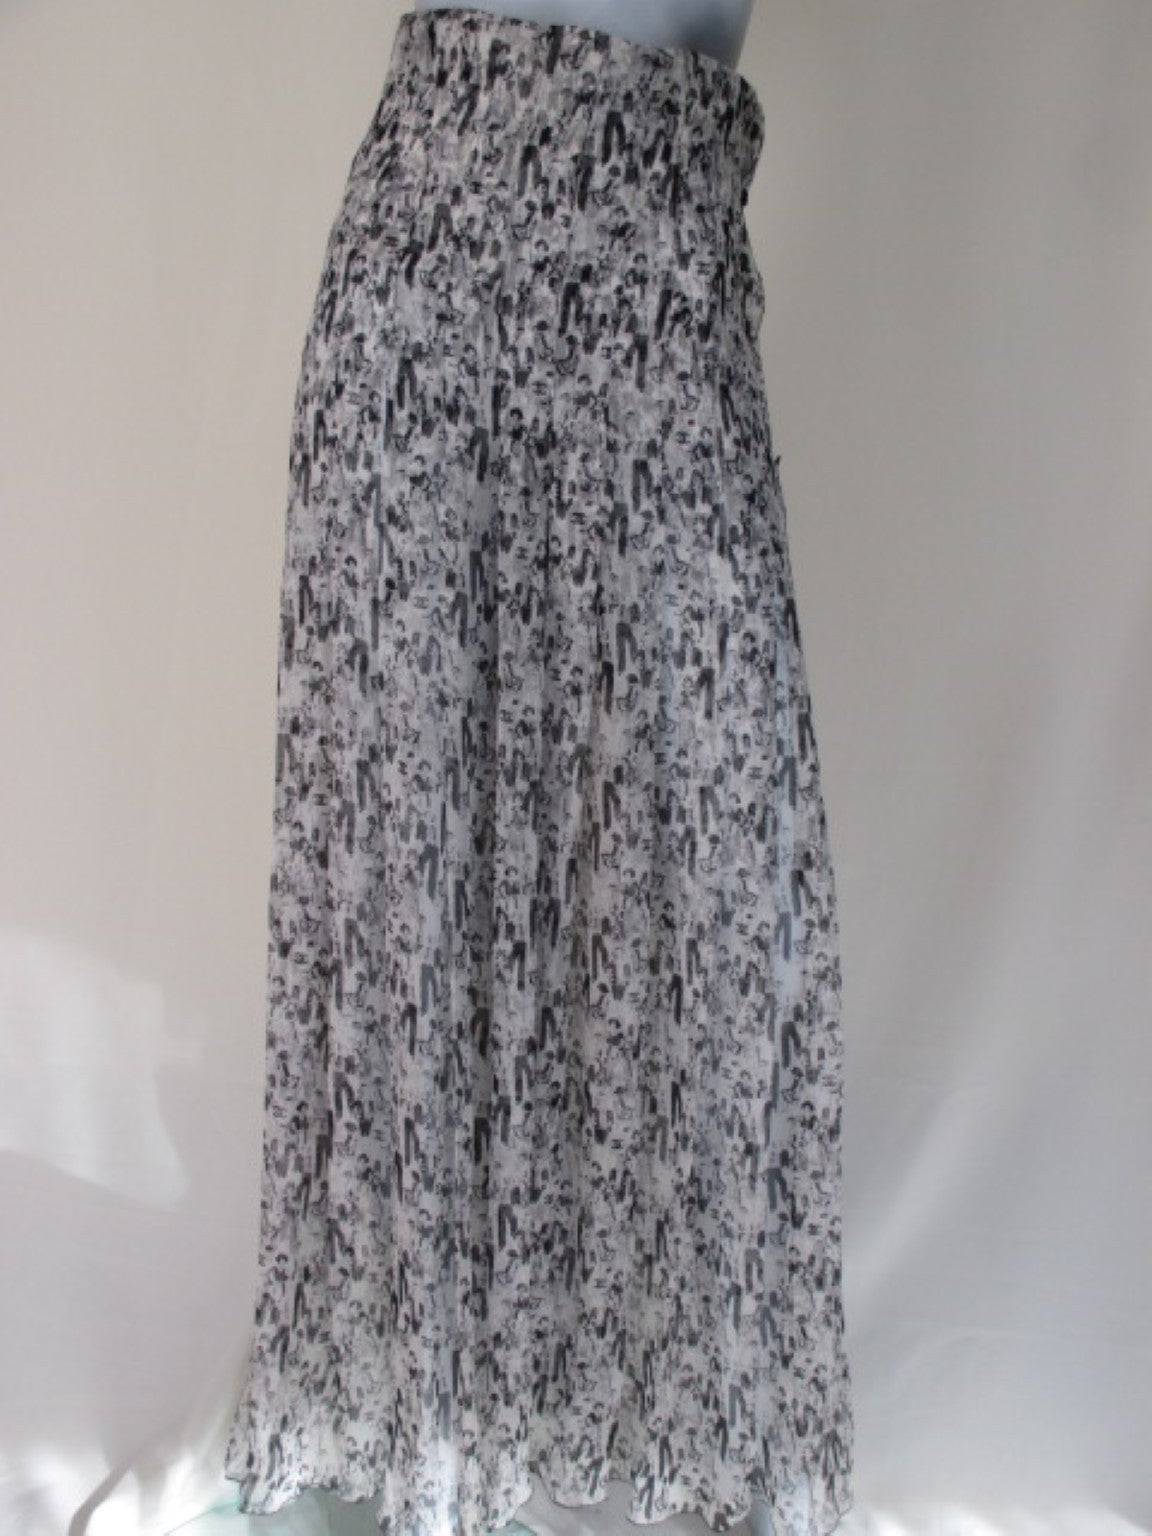 Chanel very rare high-waisted printed culottes.
Side is closing with a zipper, black cc buttons and snaps.
Fabric is 100% silk muslin and very floaty.

Size is marked France 38 but fits smaller
Slightly damaged at the bottom of the hem which is